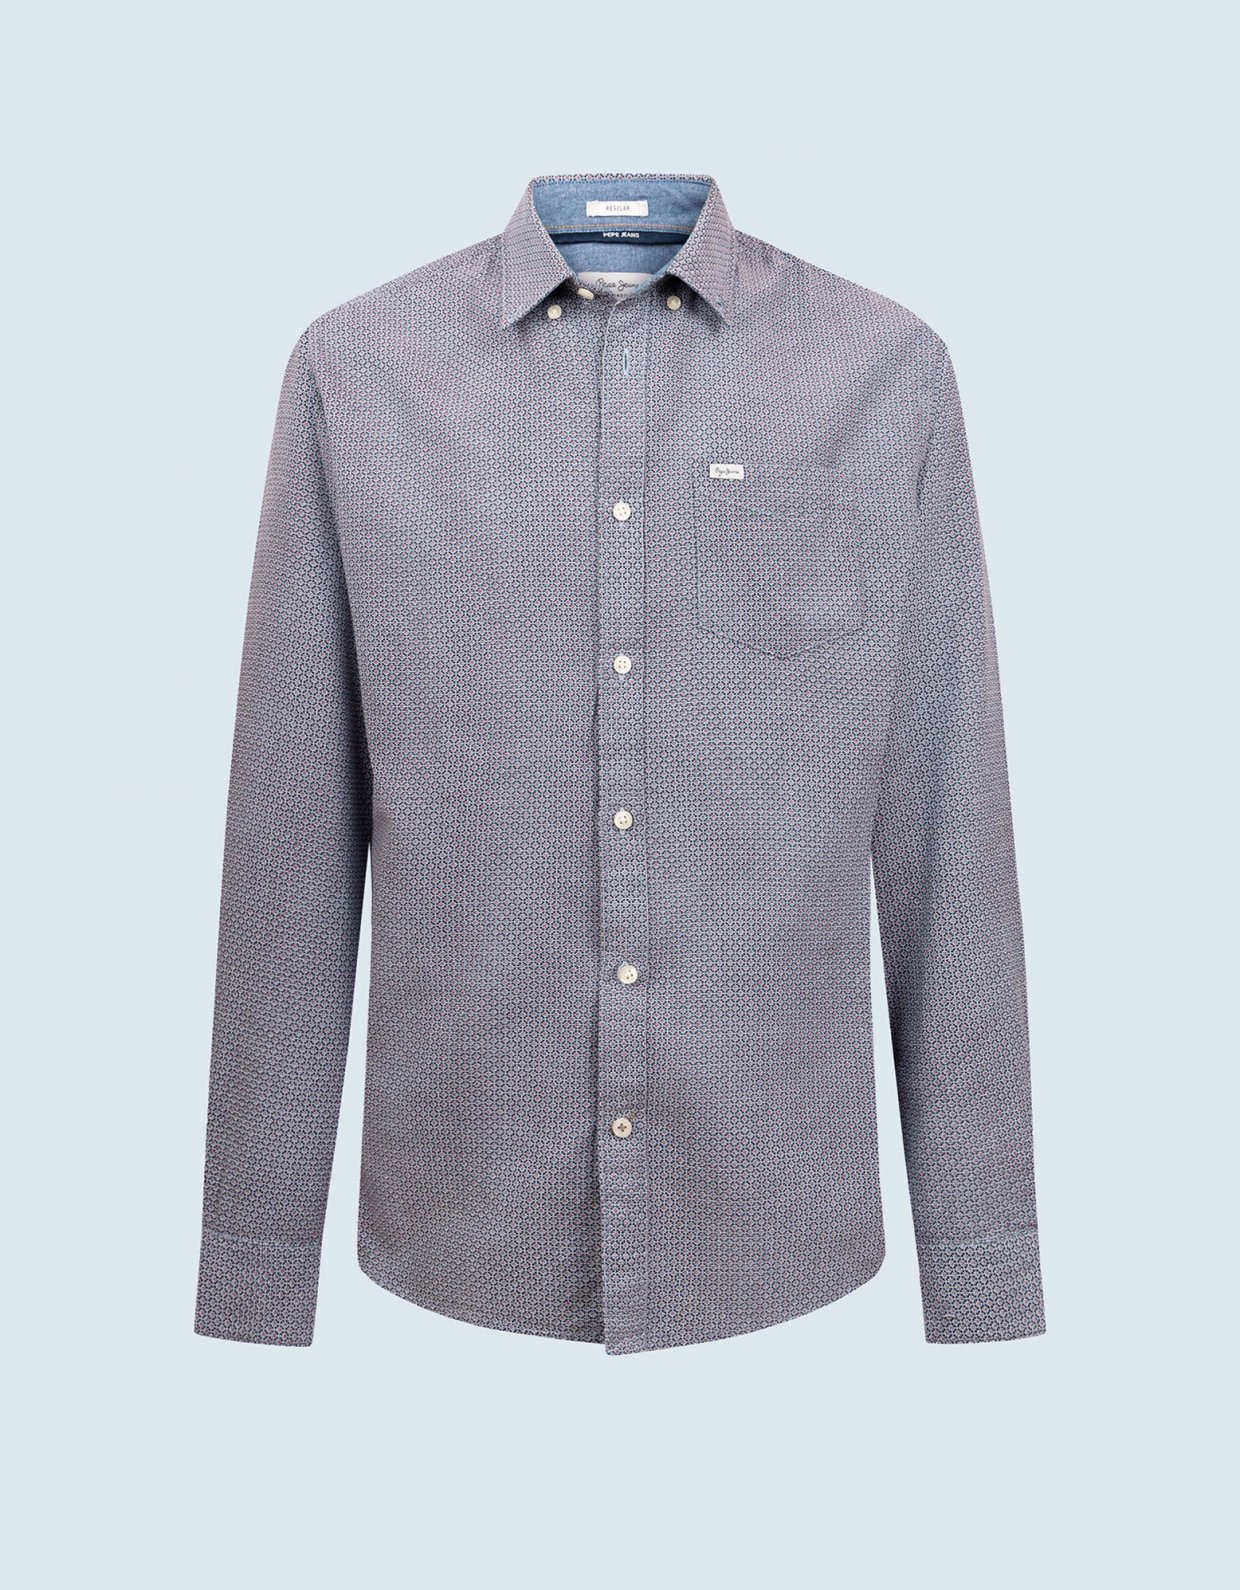 Pepe Jeans Willow microprinted shirt